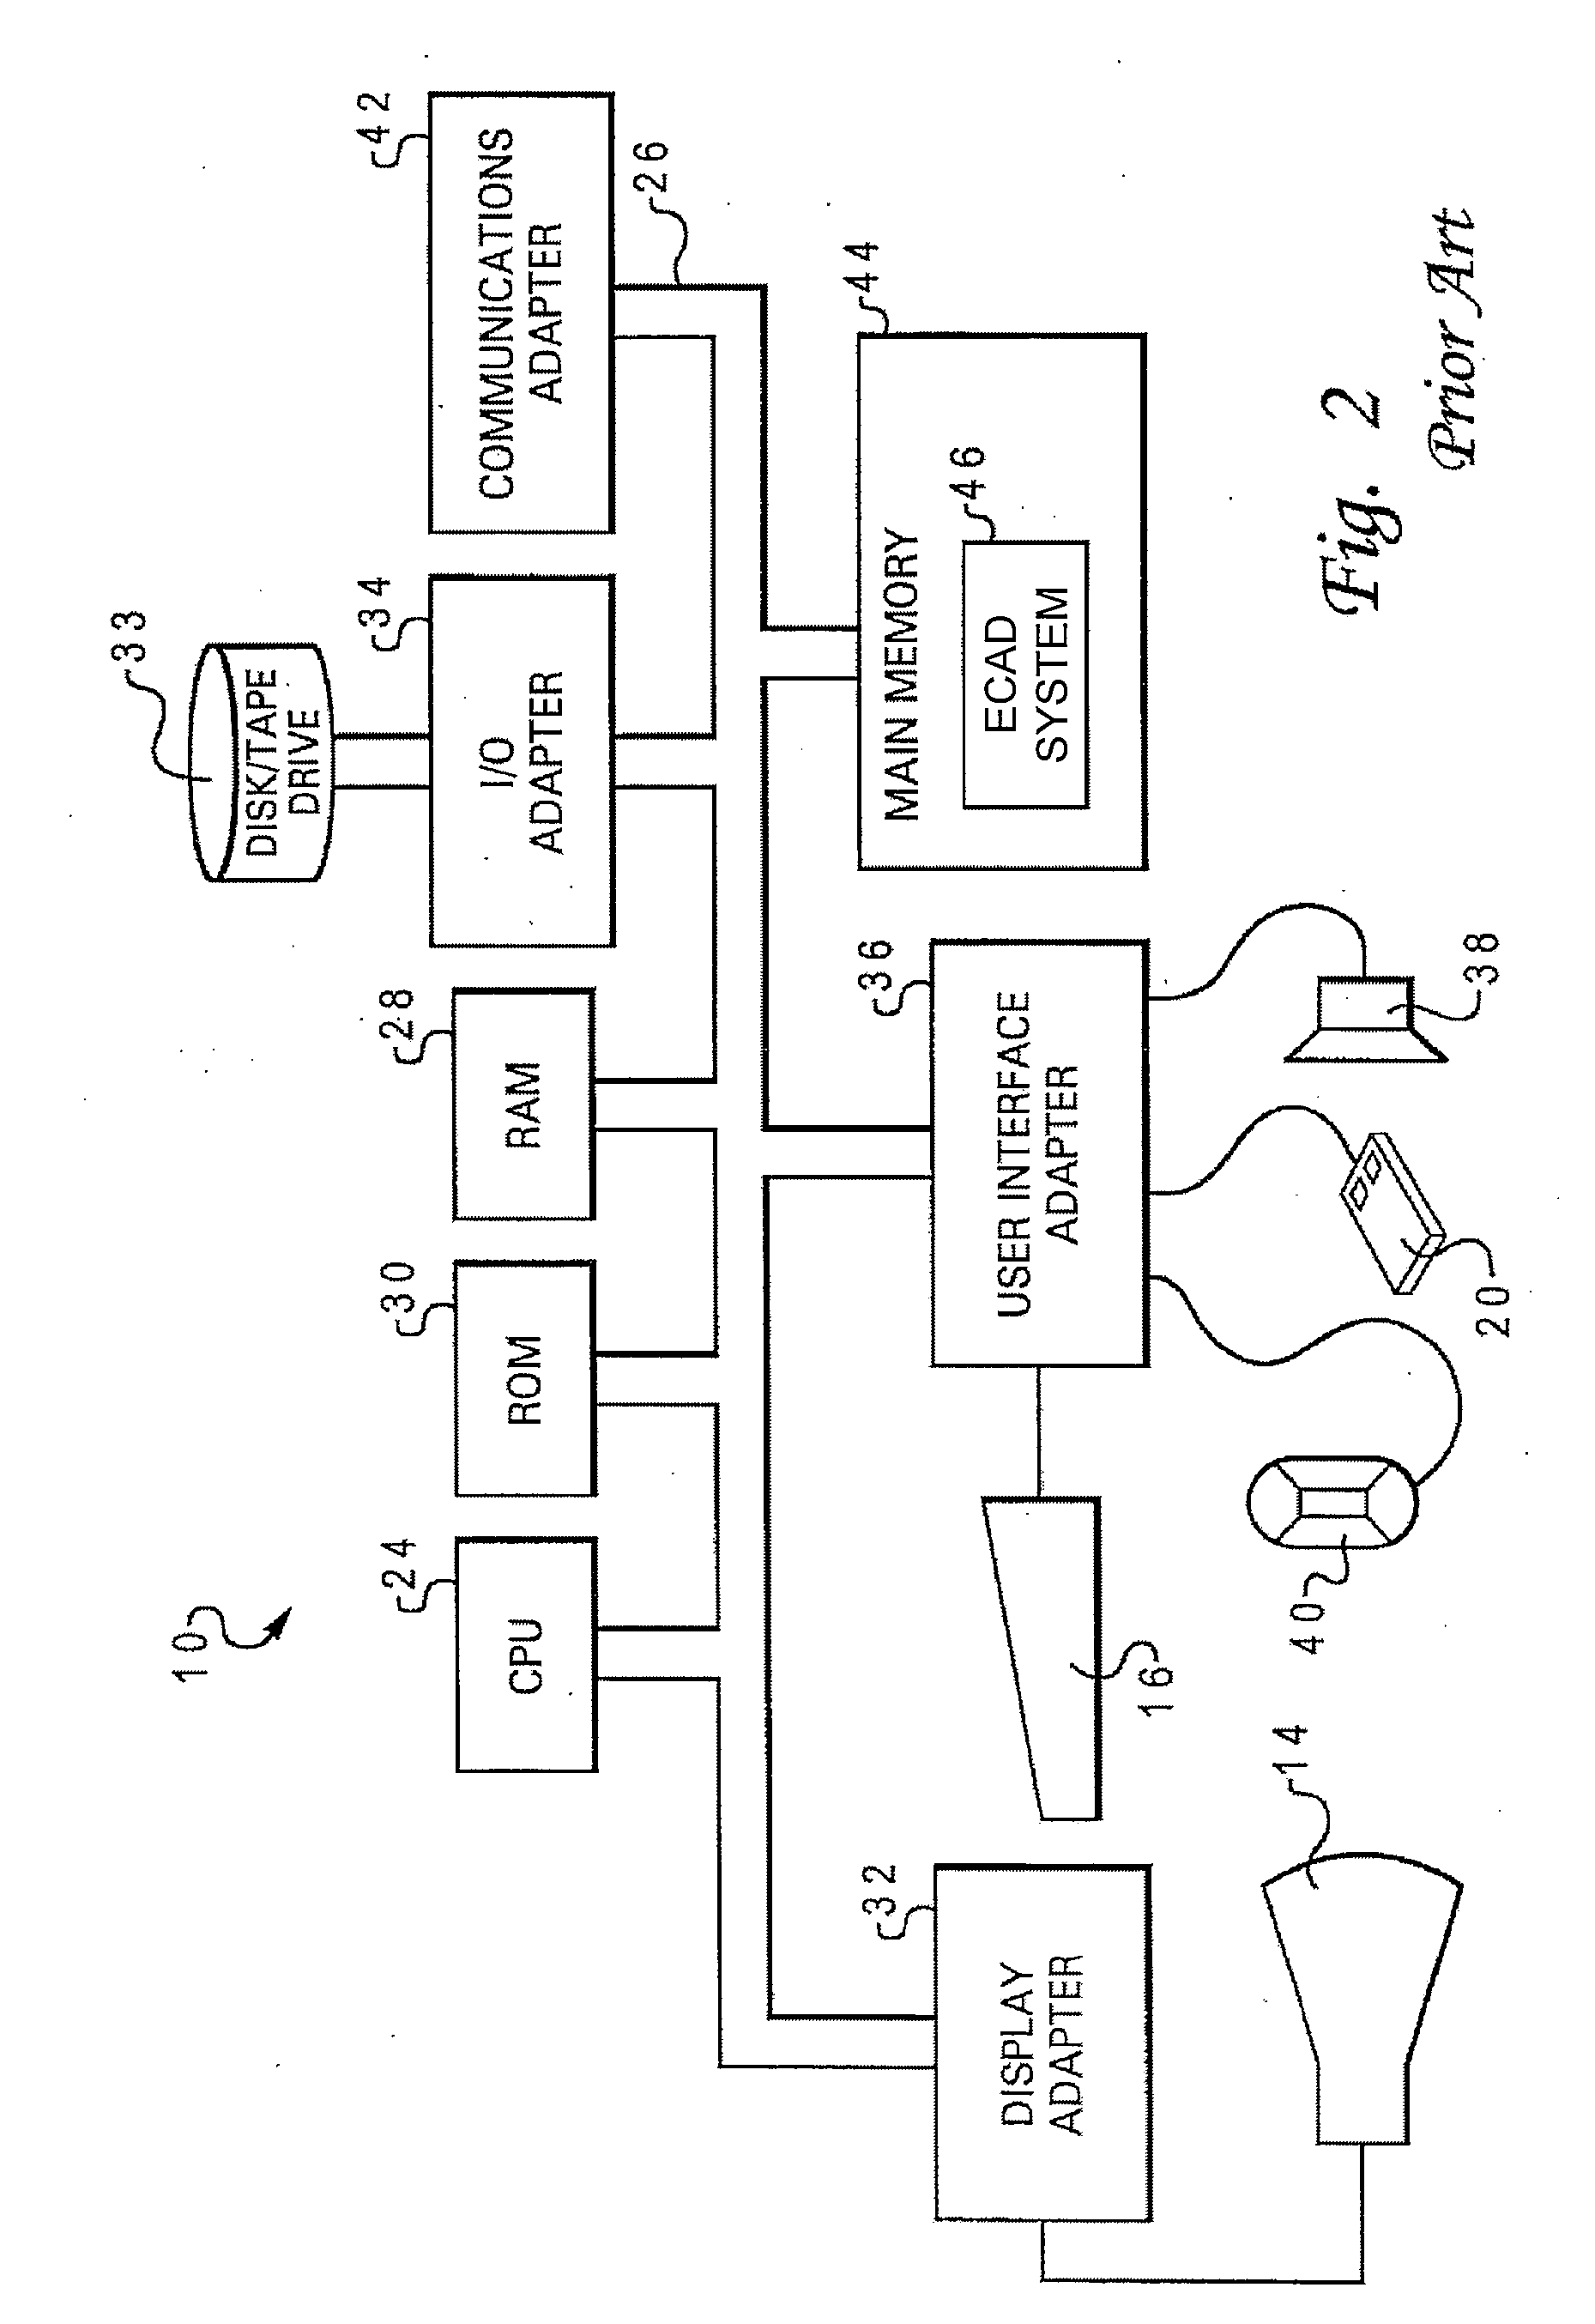 Method, system and program product supporting print events in the simulation of a digital system